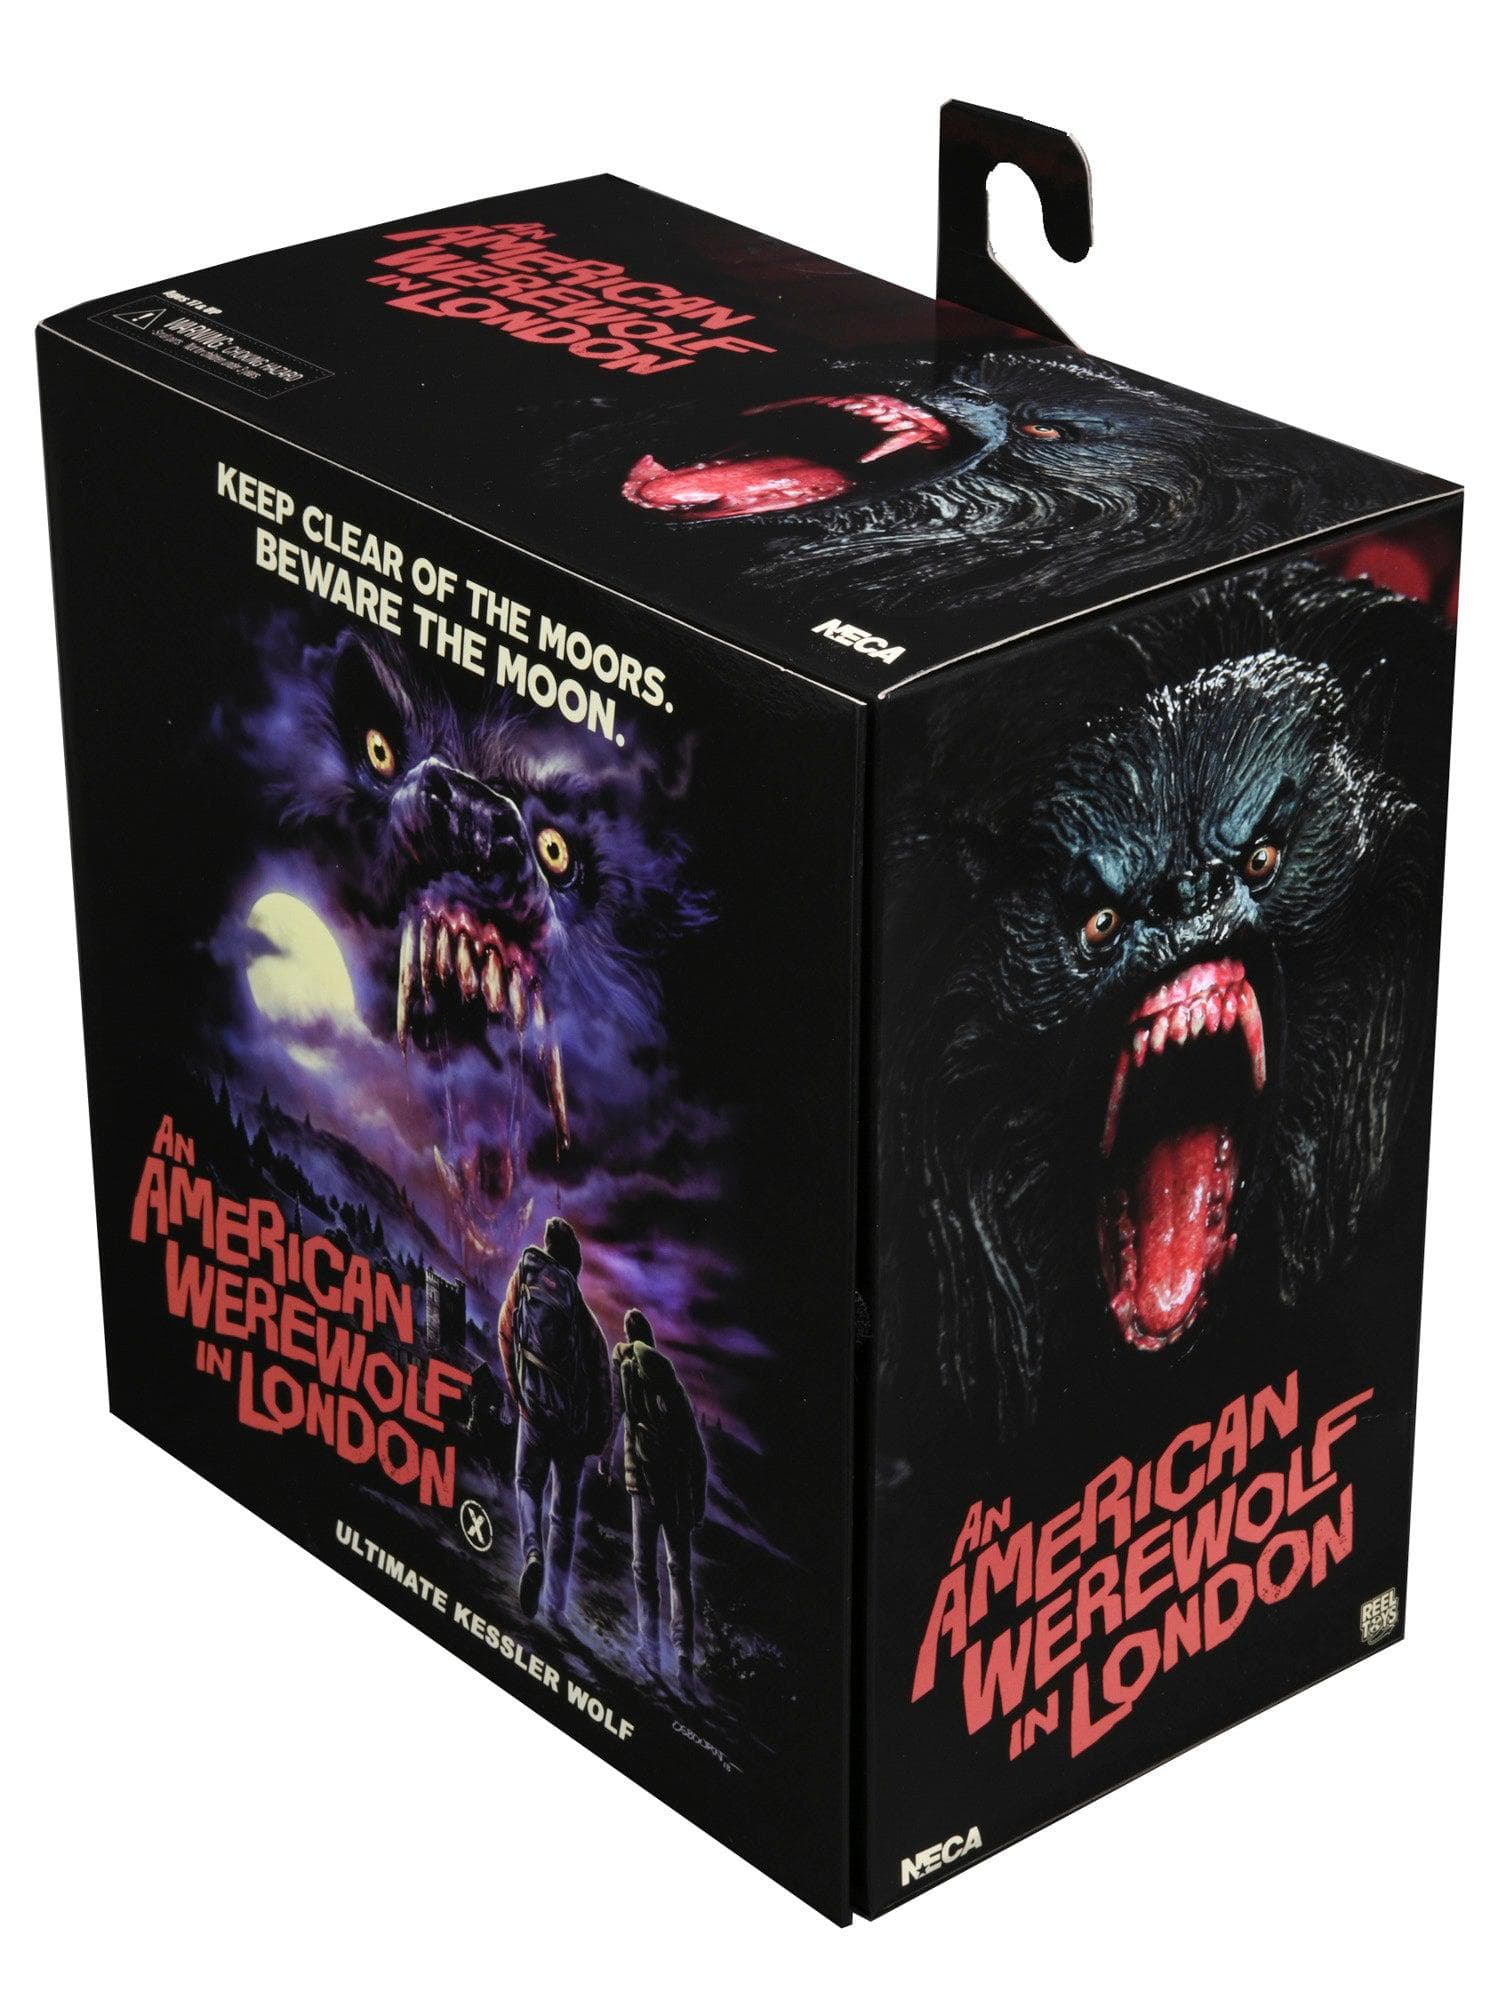 NECA - An American Werewolf in London - 7" Scale Action Figure - Ultimate Kessler Wolf - costumes.com